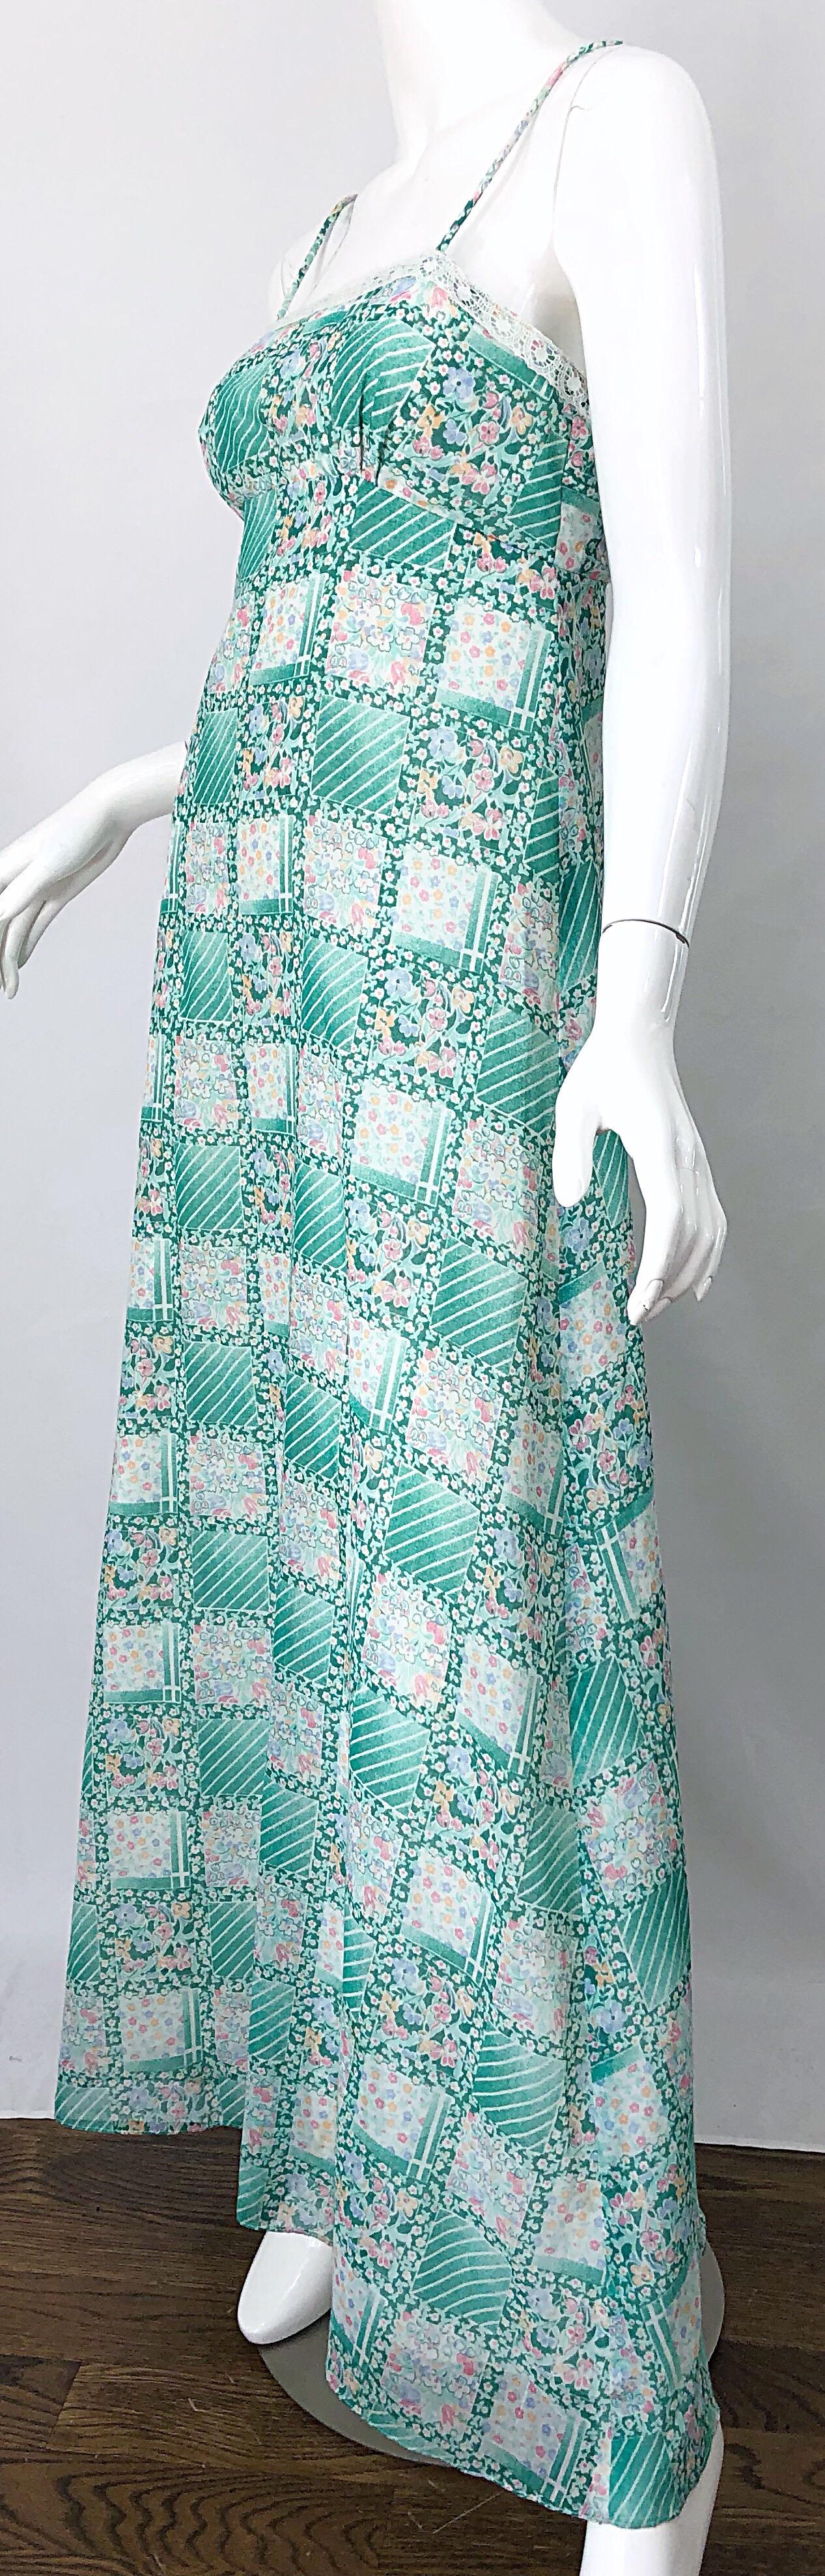 1970s Teal Green Blue Pink Flower Printed Cotton + Lace Vintage 70s Maxi Dress For Sale 4